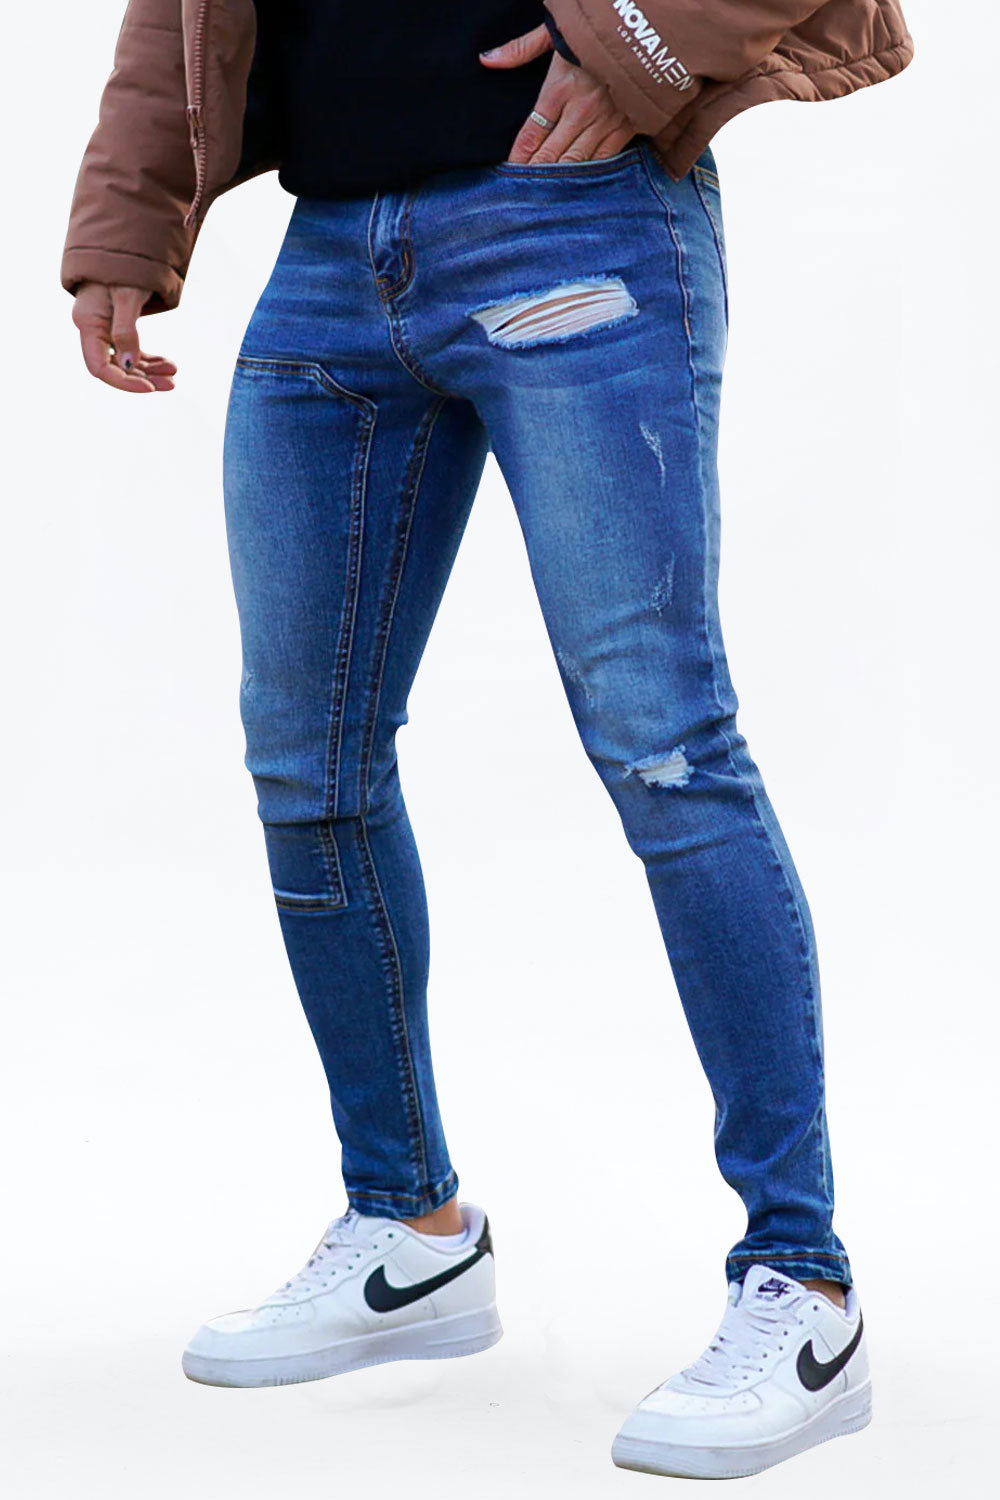 Gingtto Classic Blue Comfortable Stretch Ripped Jeans for Men